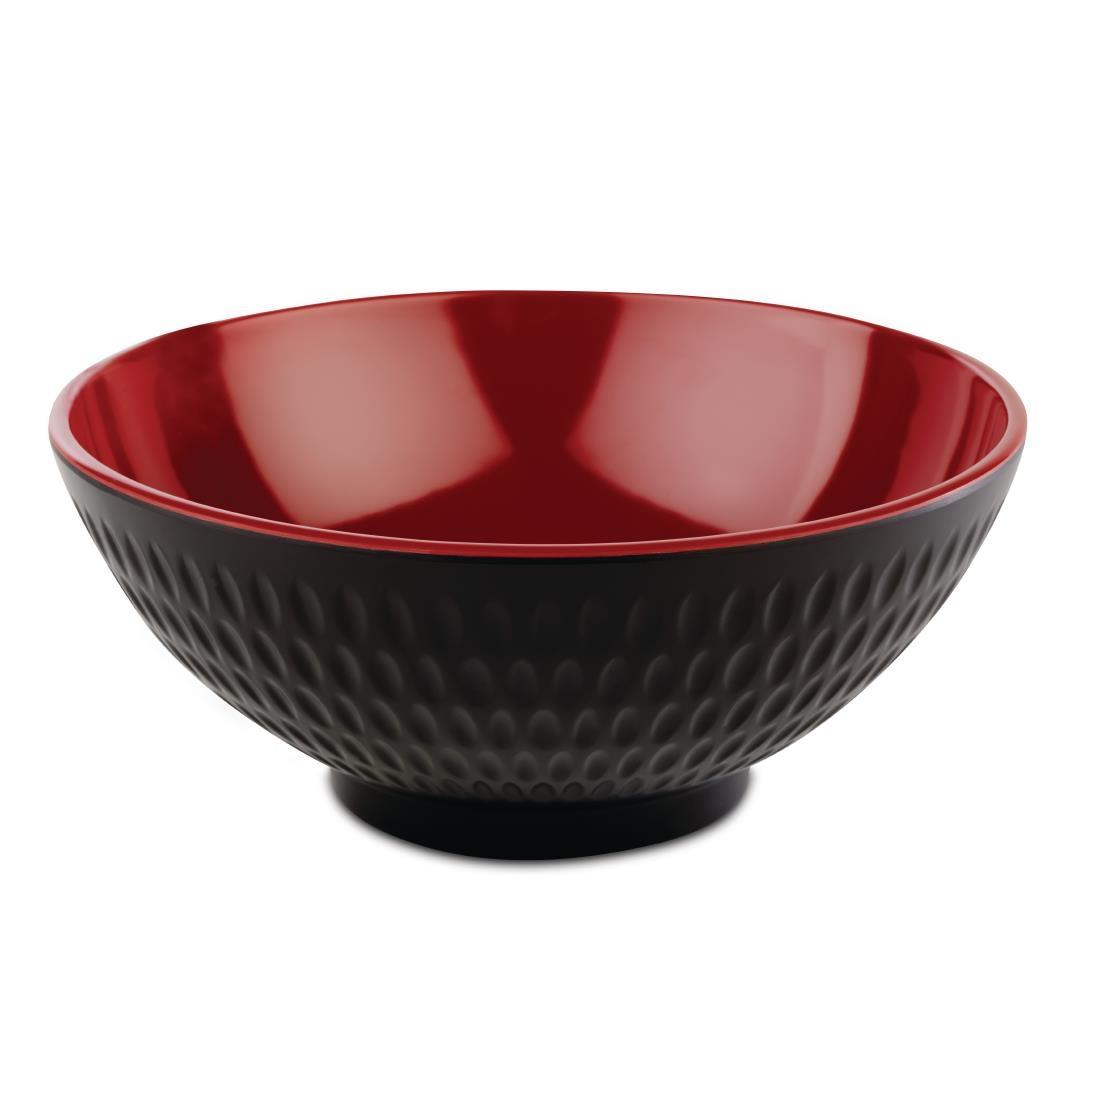 APS Asia+ Bowl Red 160mm - DW020  - 1